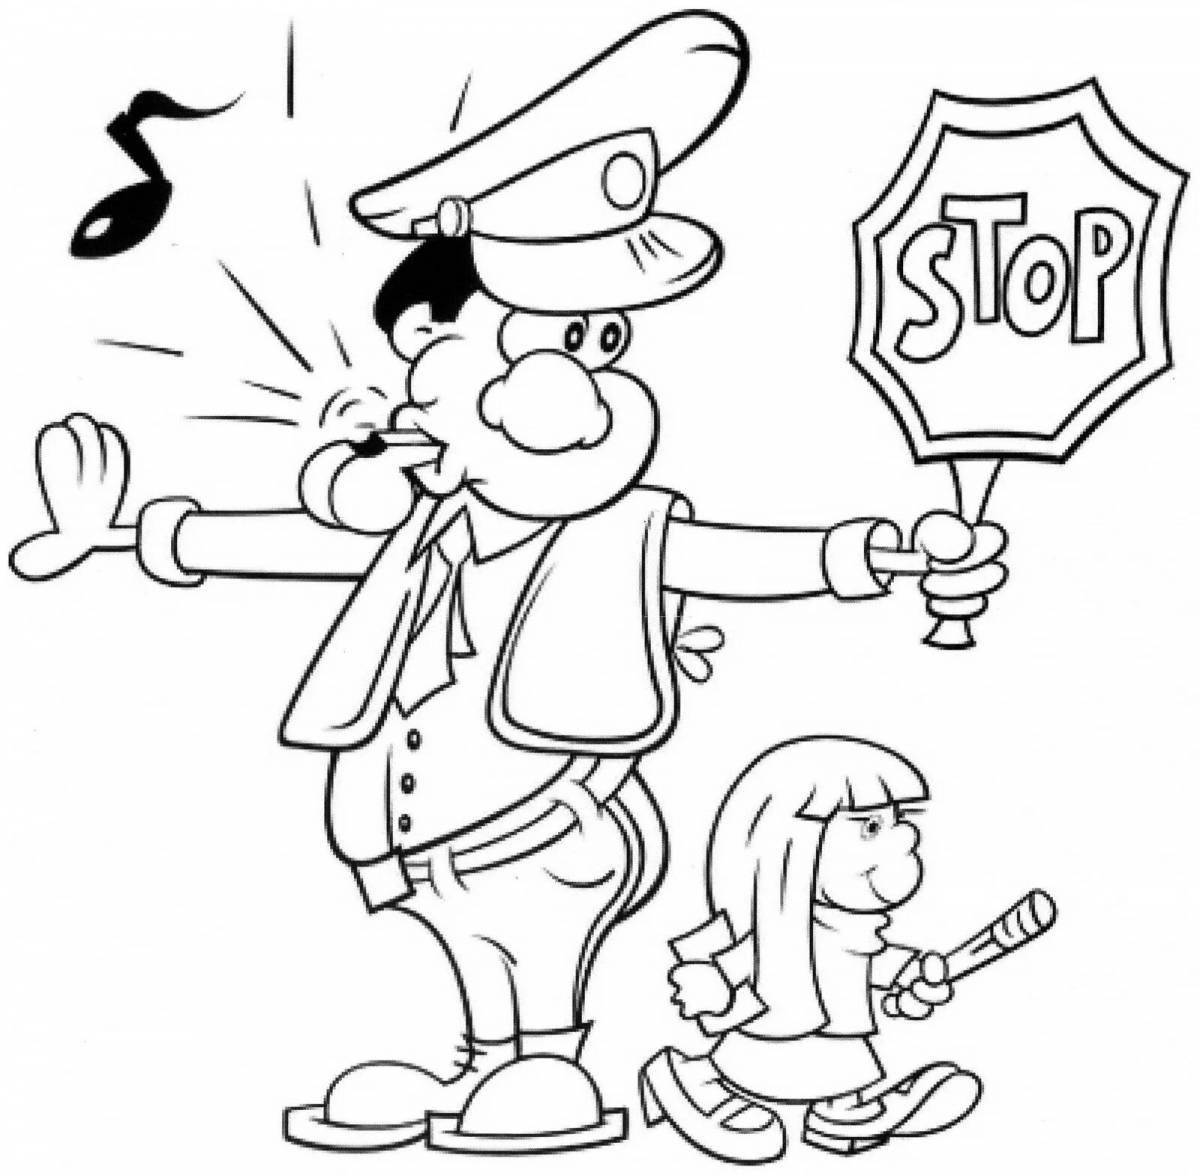 A fun traffic controller coloring page for little ones